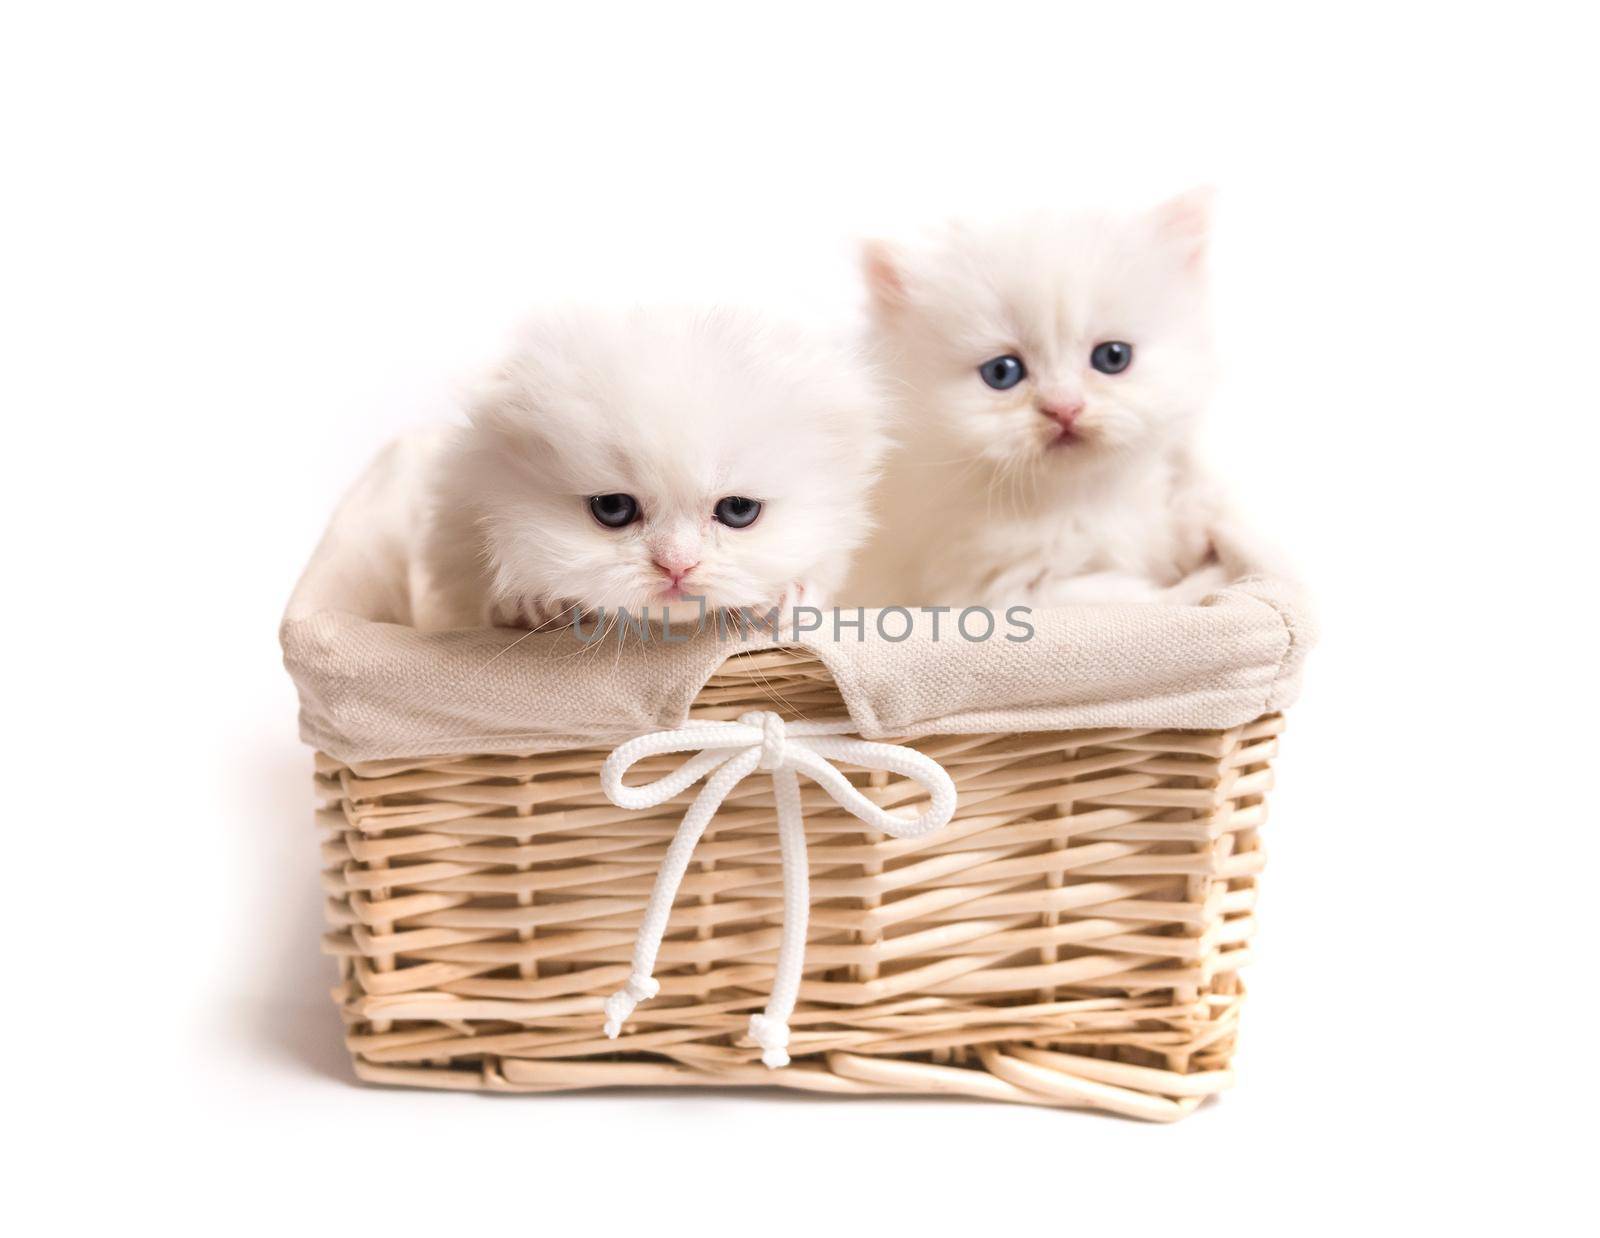 two Scottish fluffy kittens in a basket isolated on white background